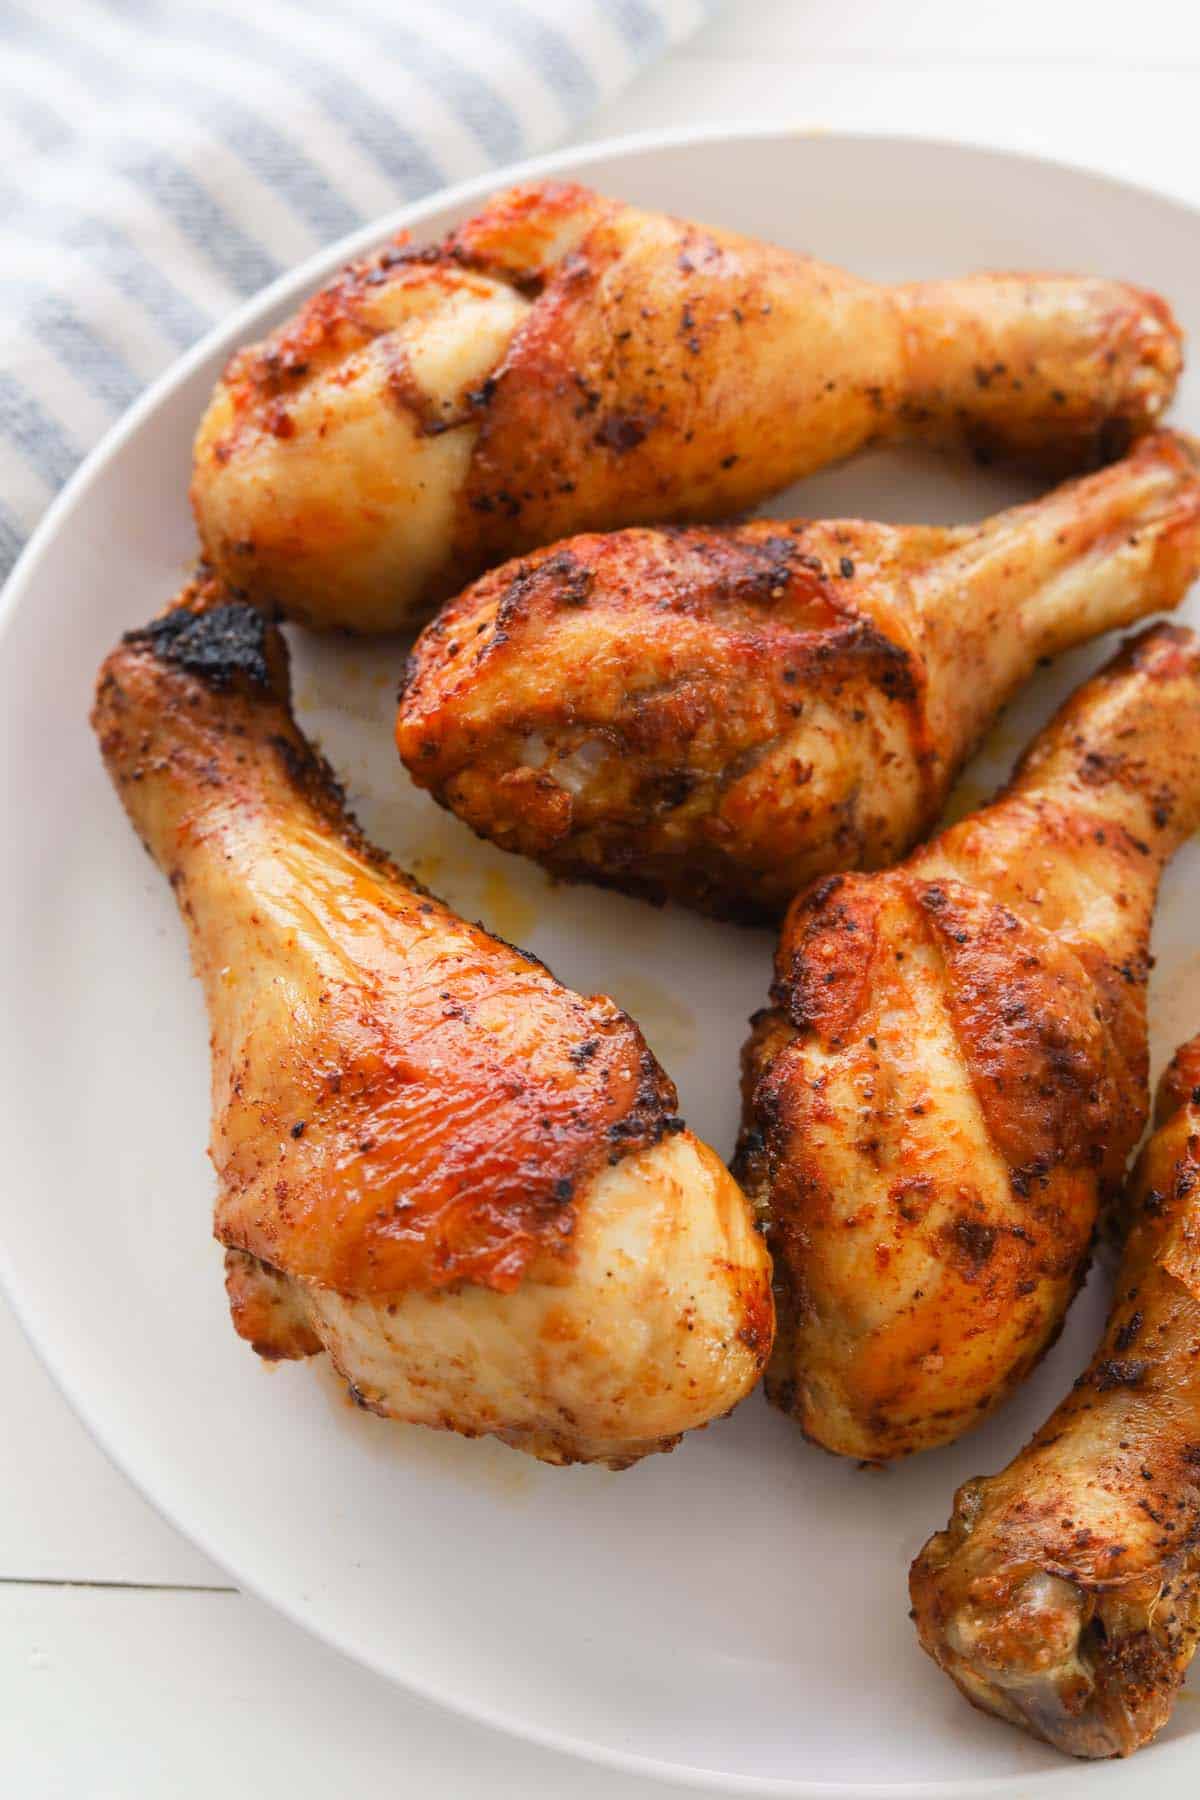 Closeup of cooked chicken drumsticks on a plate.